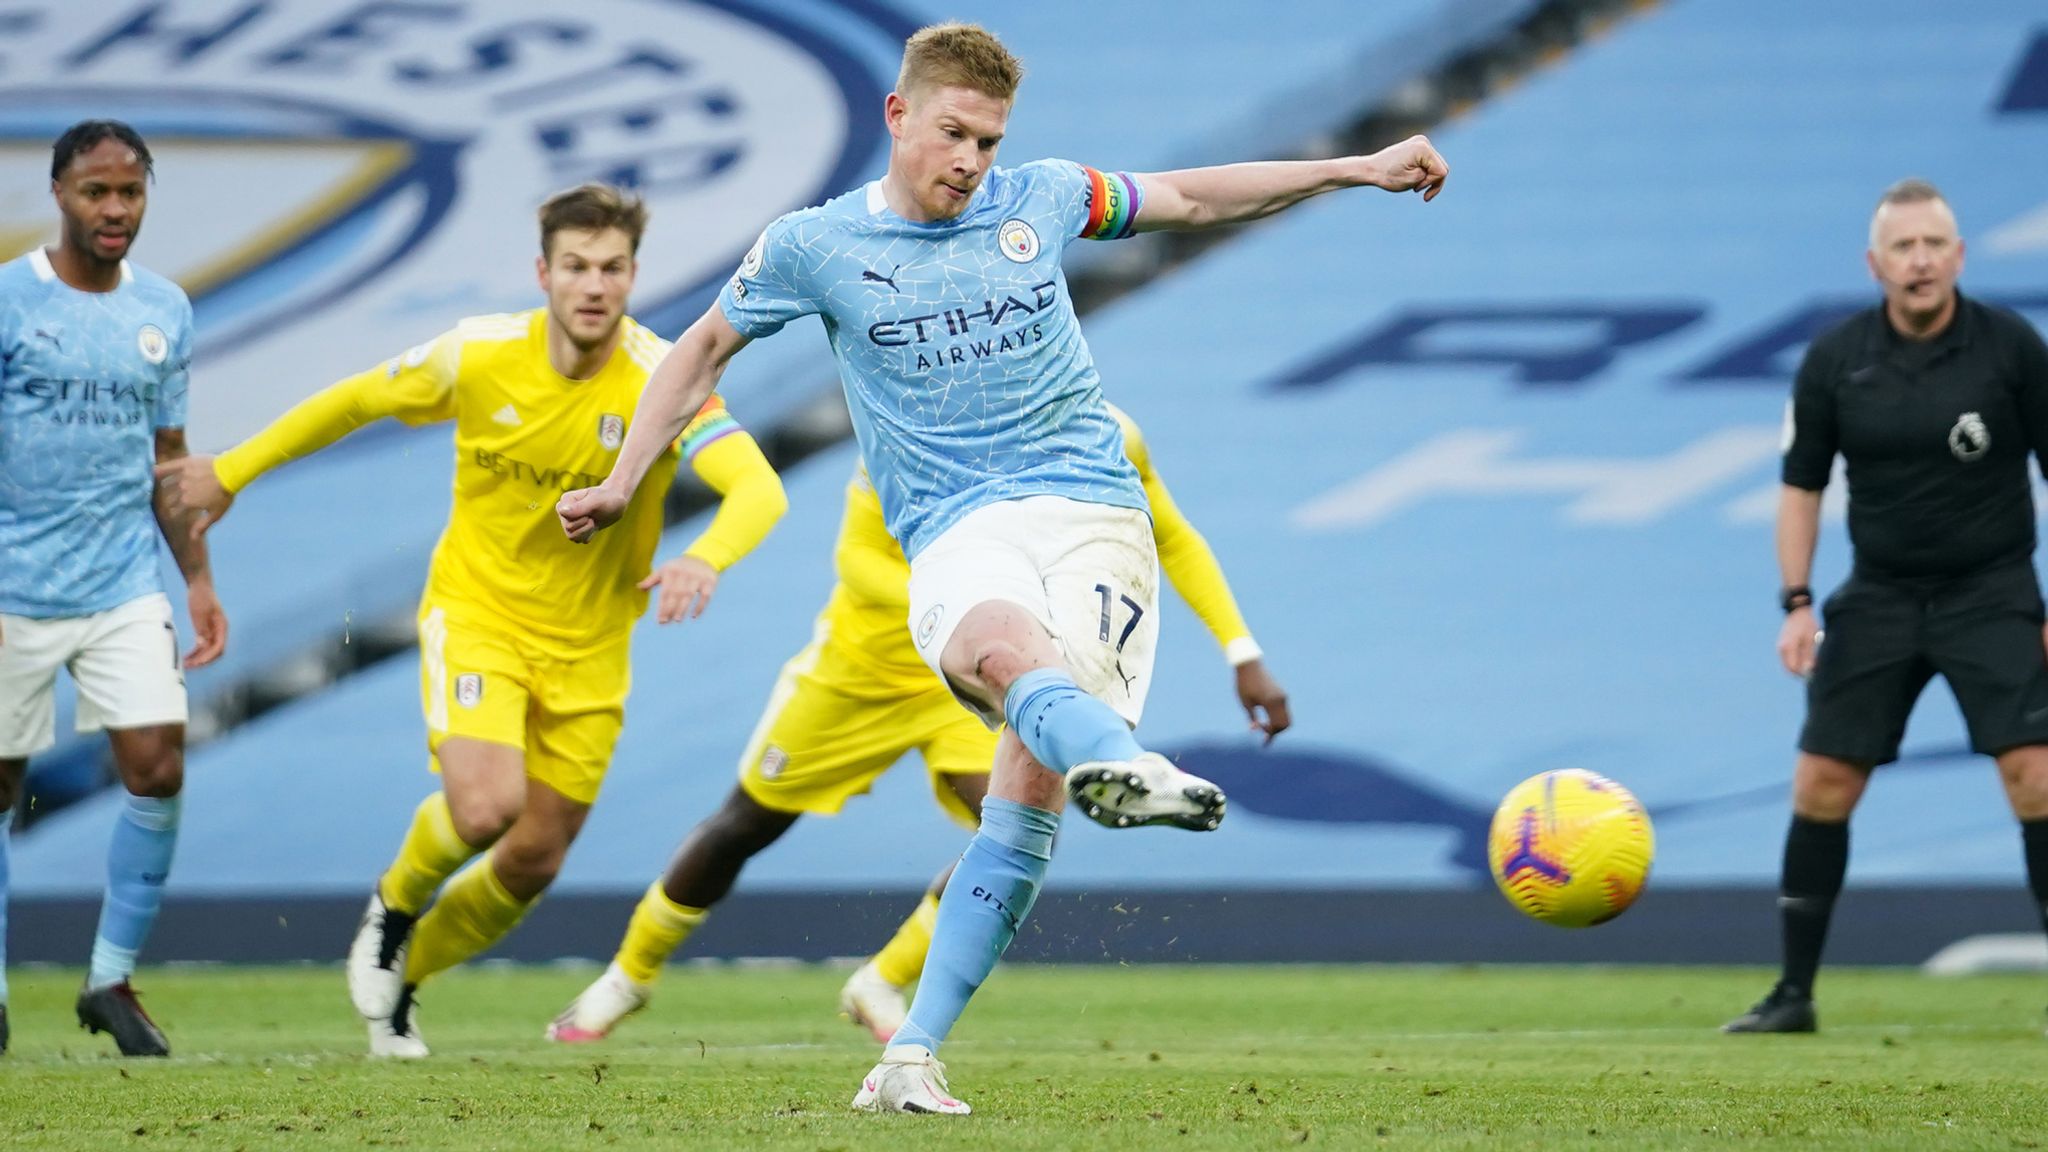 Man City 2-0 Fulham Kevin De Bruyne and Raheem Sterling fire as Pep Guardiolas men return to swaggering best Football News Sky Sports